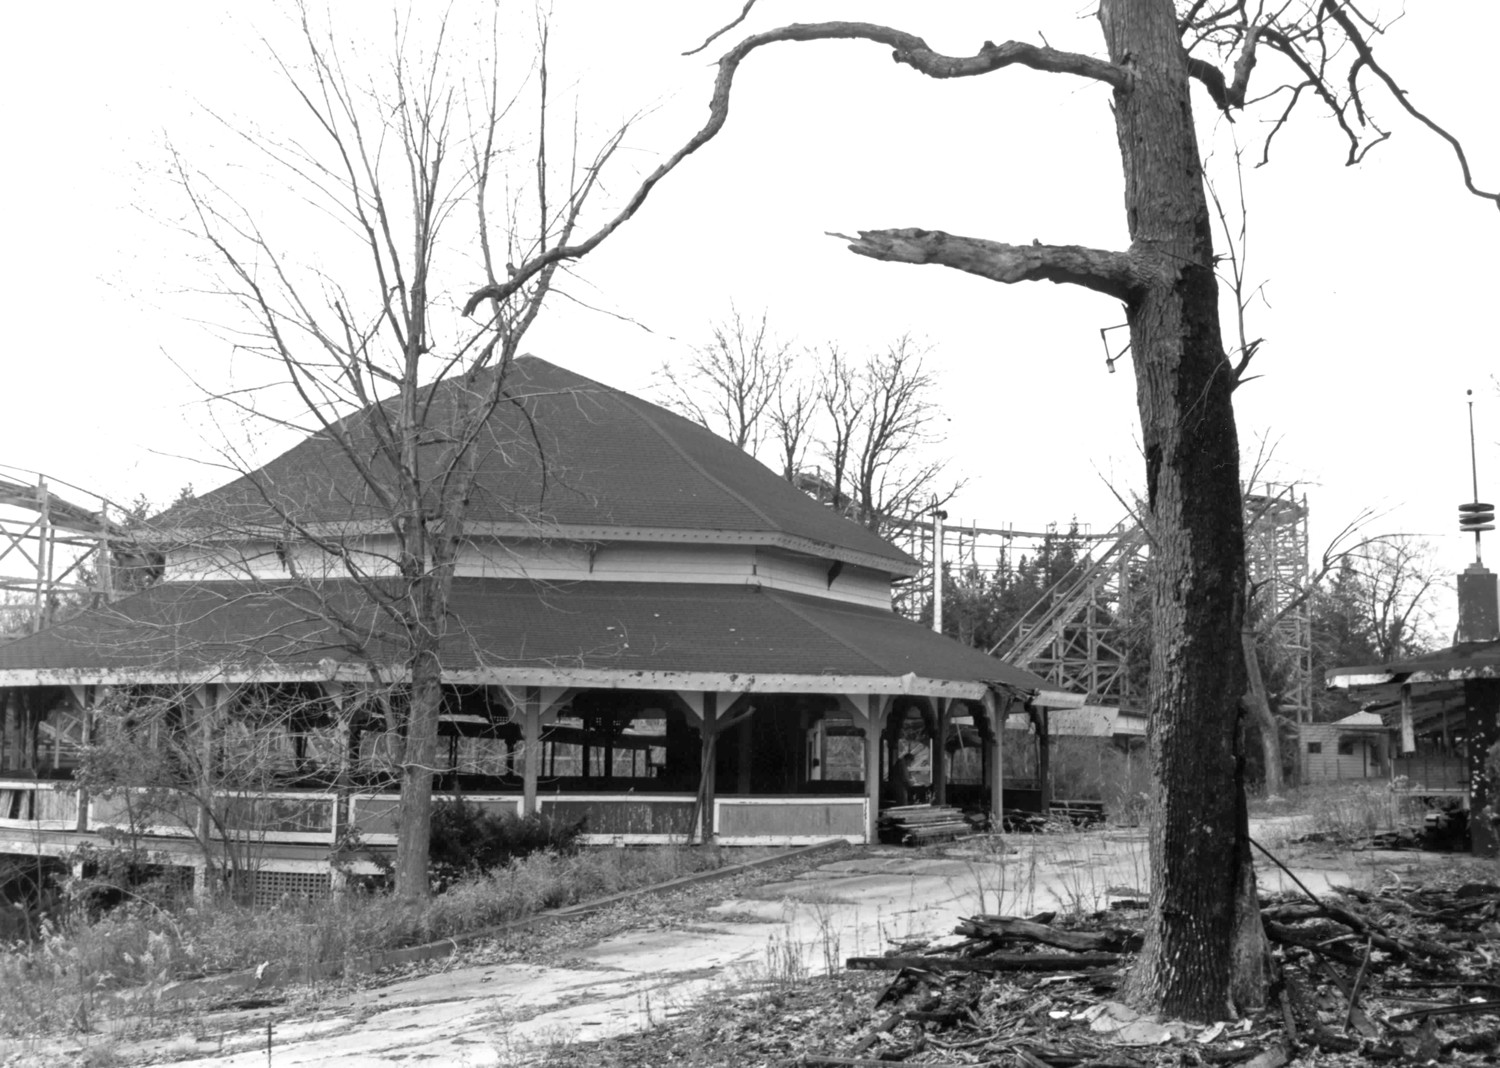 Idora Park, Youngstown Ohio Merry-go-round building with the Wildcat in the distance, looking northwest from the midway (1992)